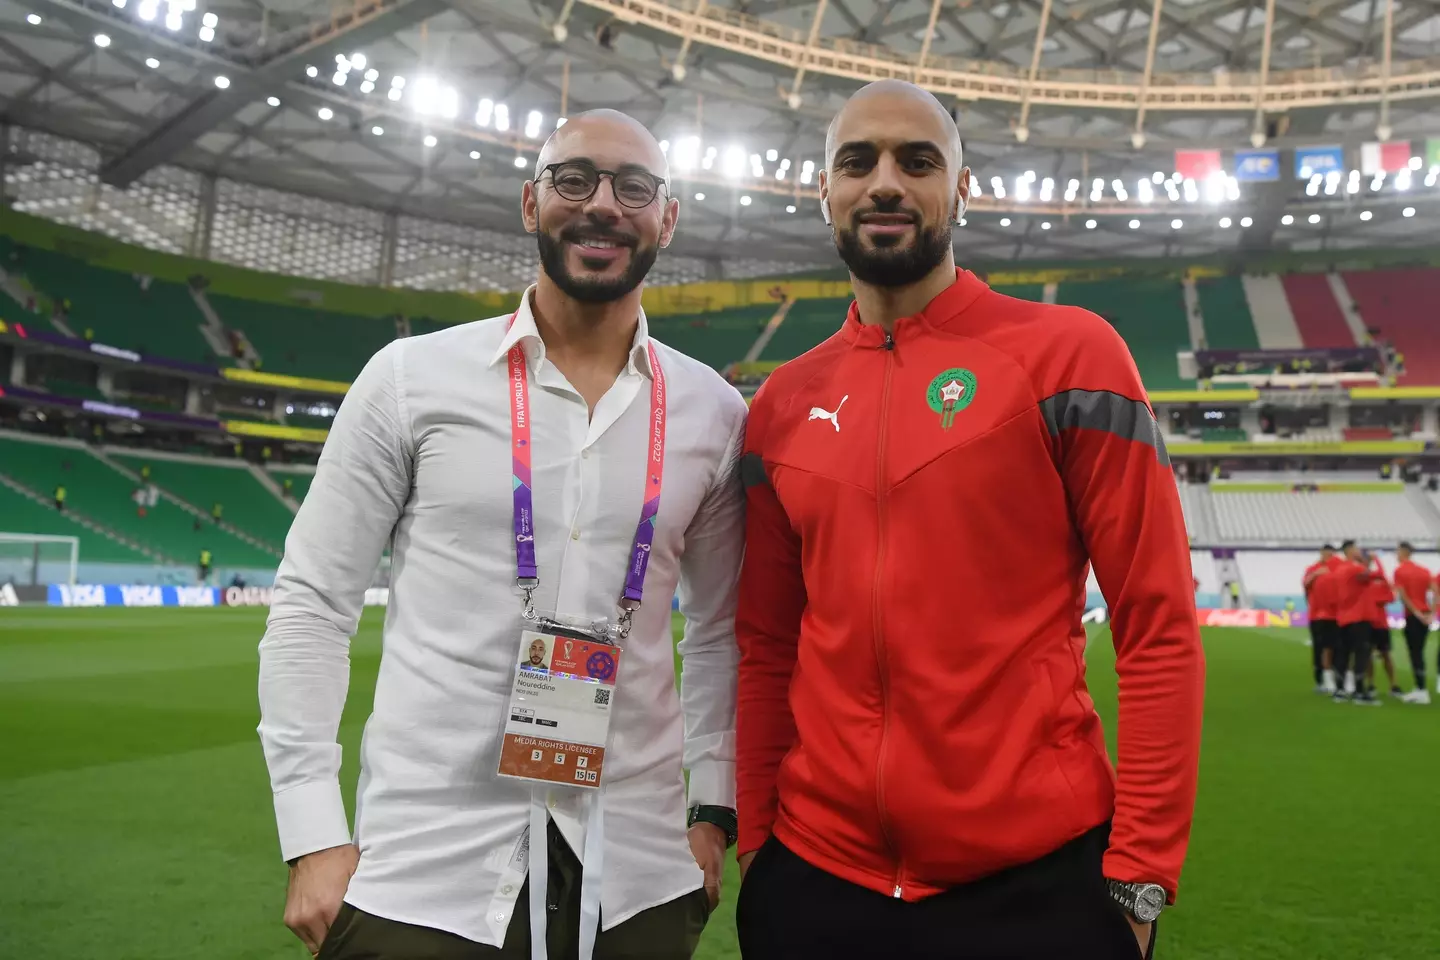 Nordin Amrabat(L) with his brother Sofyan Amrabat(R) during the 2022 World Cup. Image